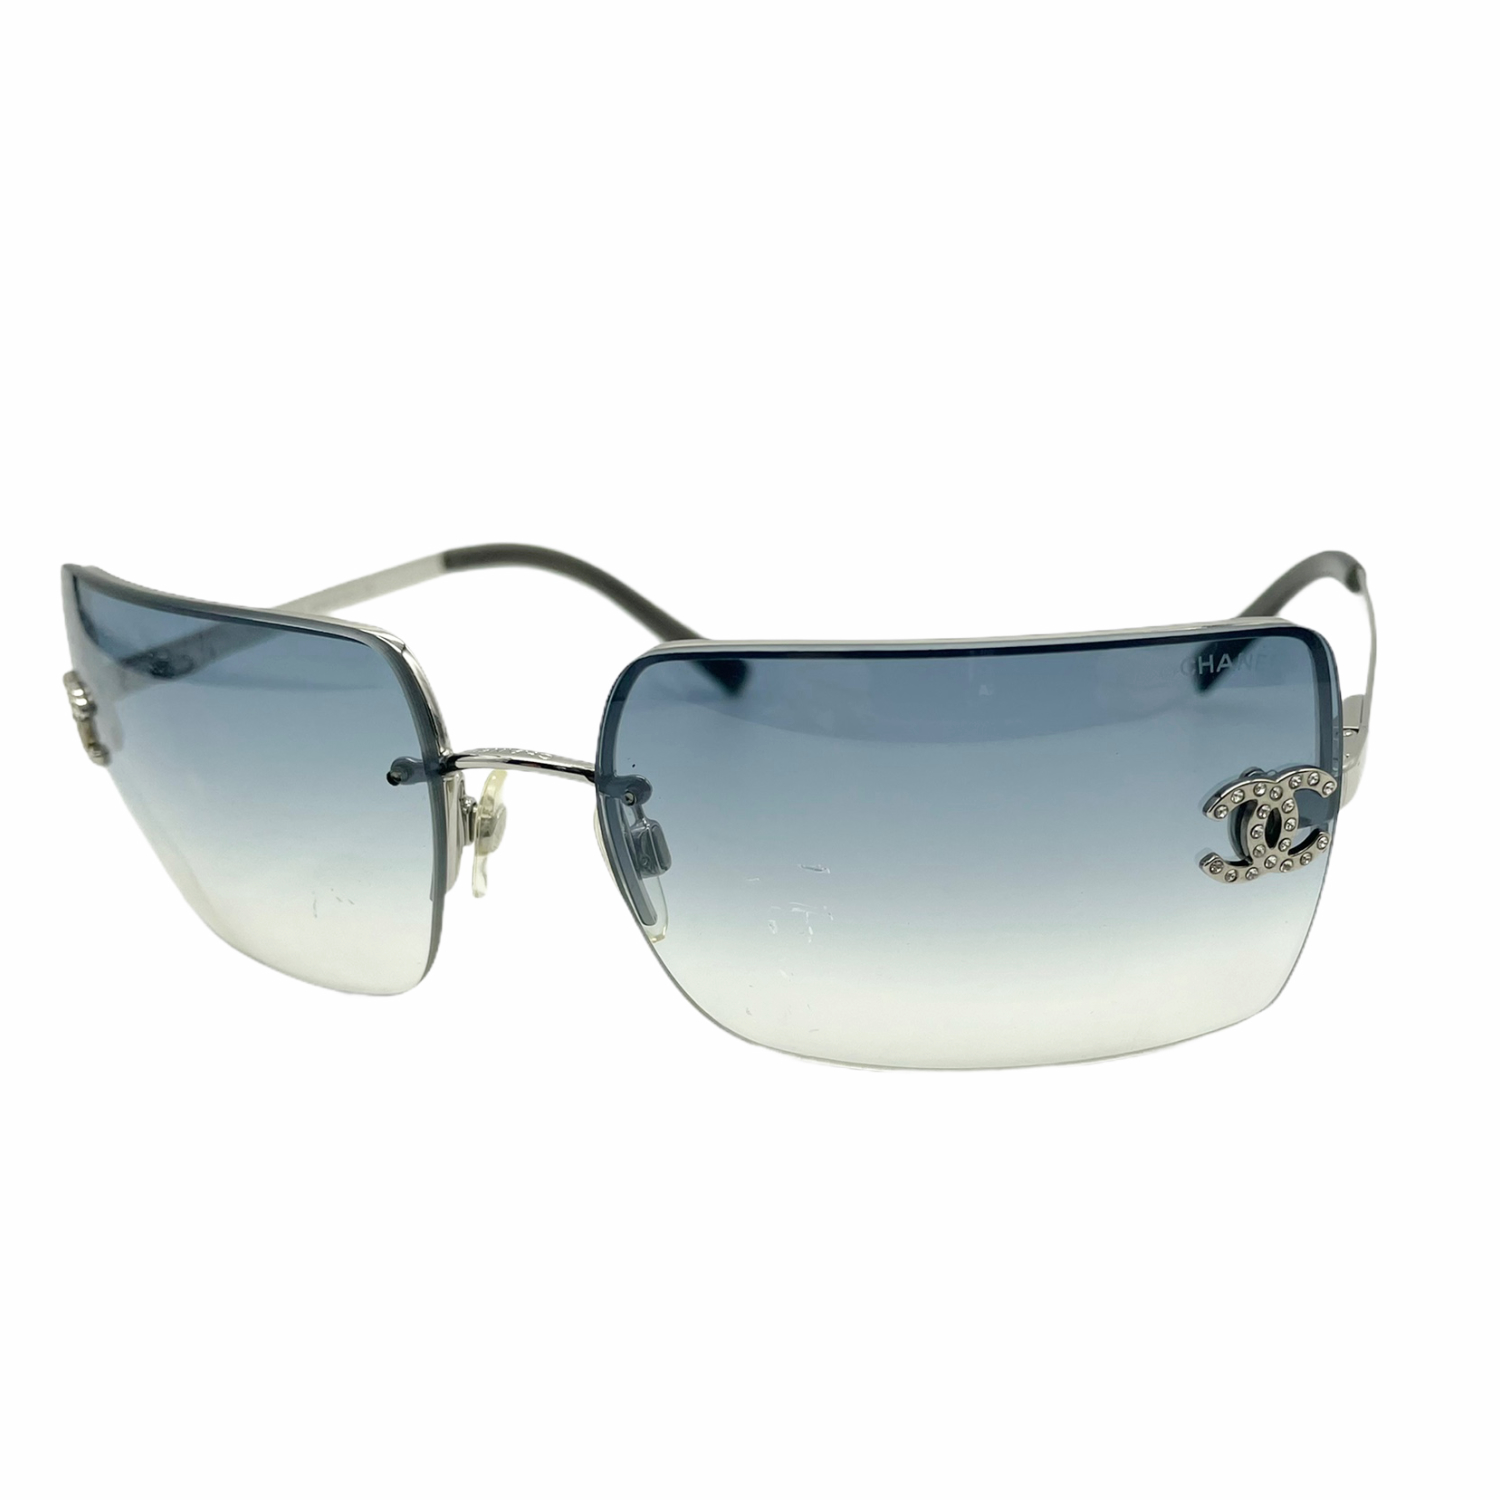 Buy Vintage Chanel Sunglasses Online In India -  India